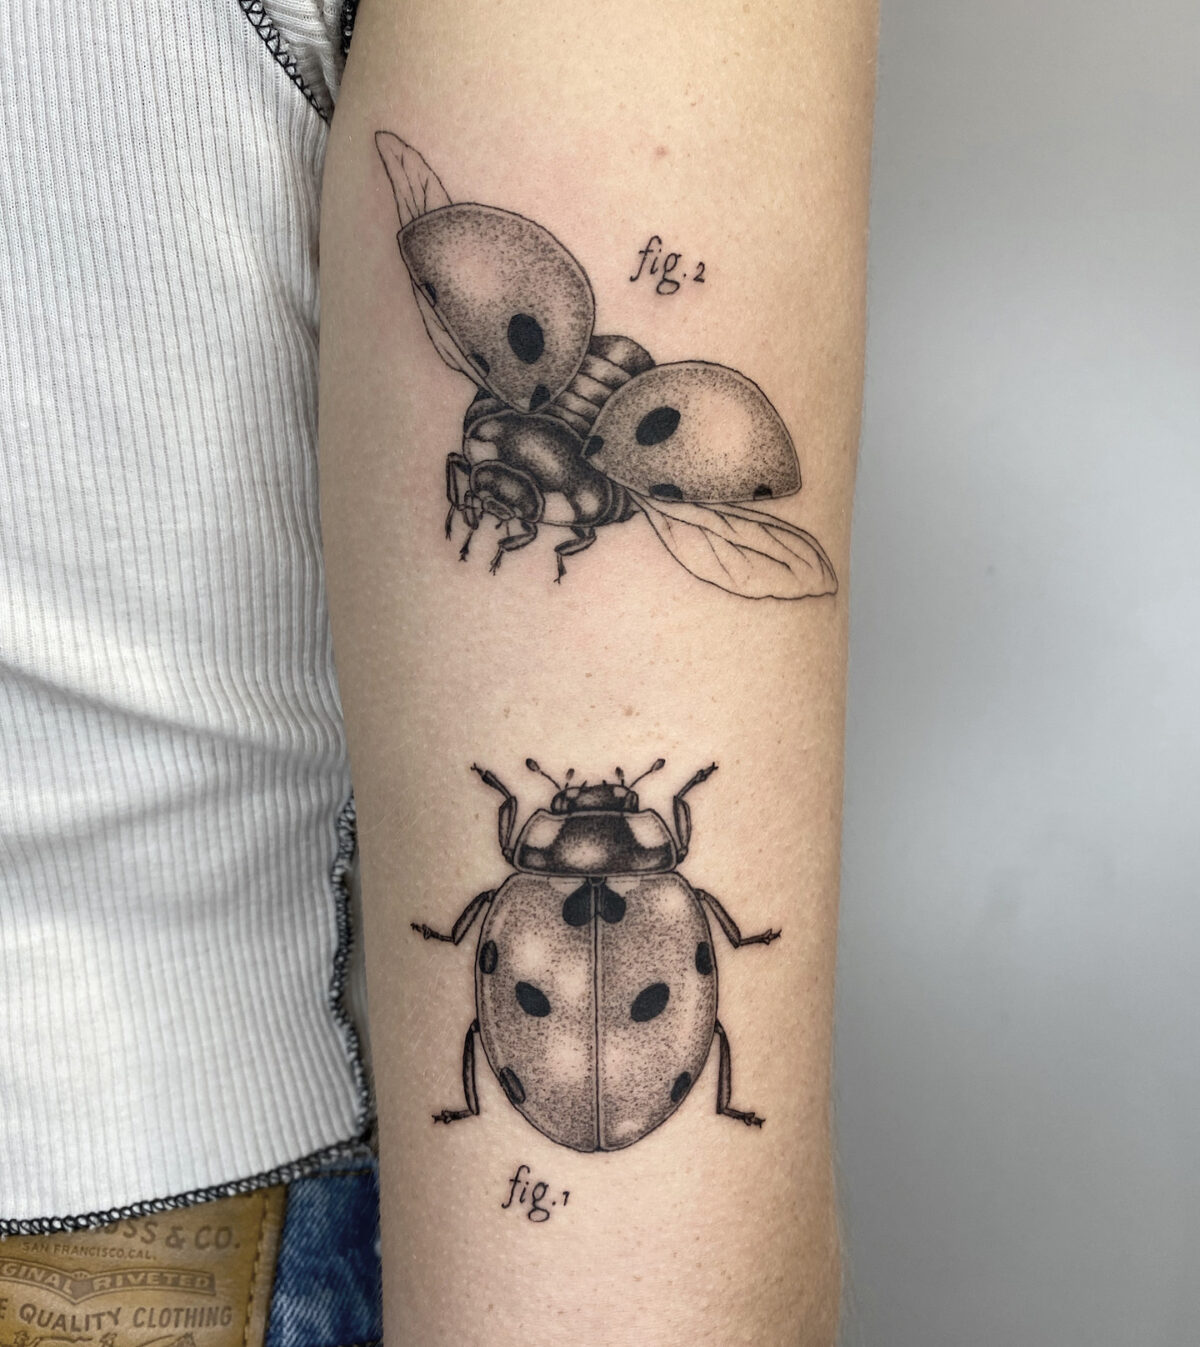 Whimsical Vintage Science Book Inspired Tattoos By Michele Volpi 11